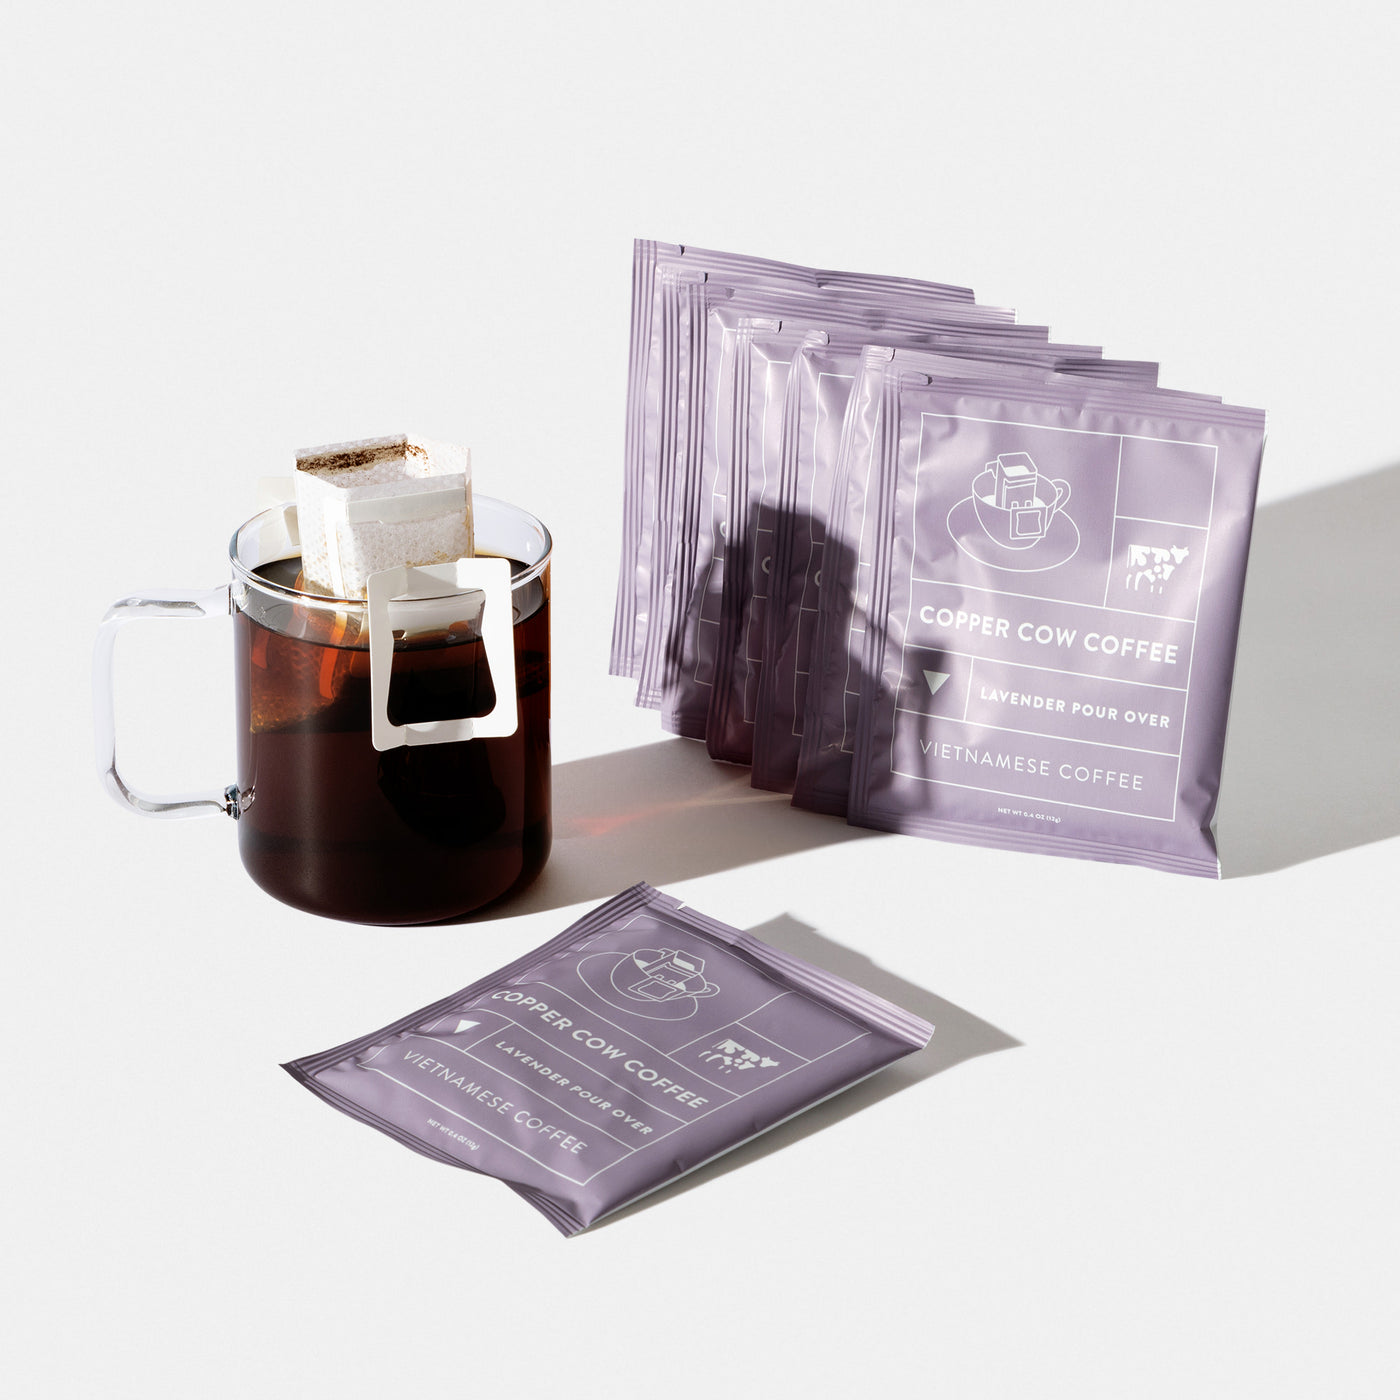 8-pack: 8-Pack of Lavender Vietnamese Coffee single-serve pour over pouches next to black cup of brewing coffee.